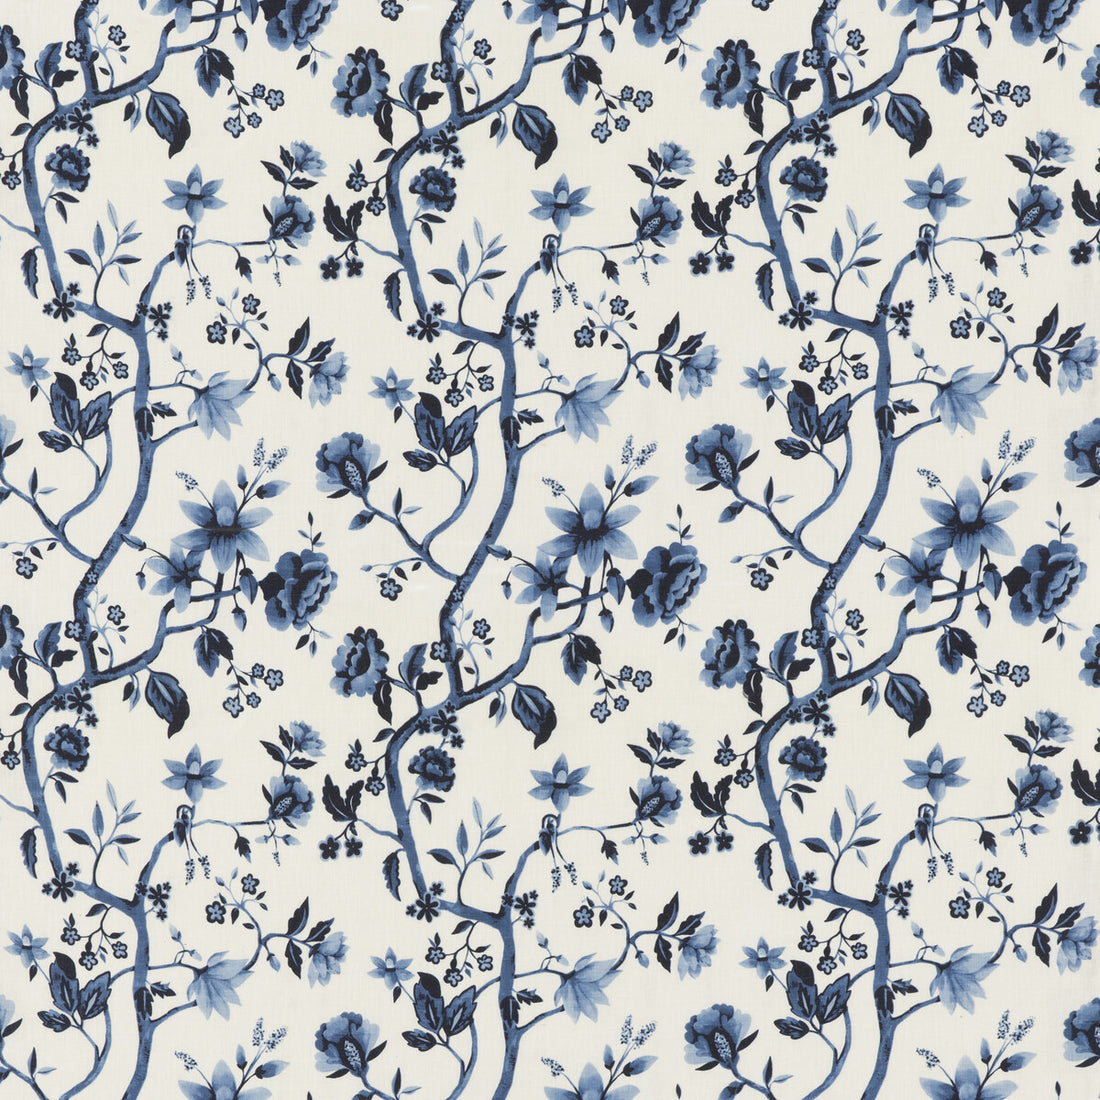 Petworth fabric in indigo color - pattern BP10910.1.0 - by G P &amp; J Baker in the Portobello collection